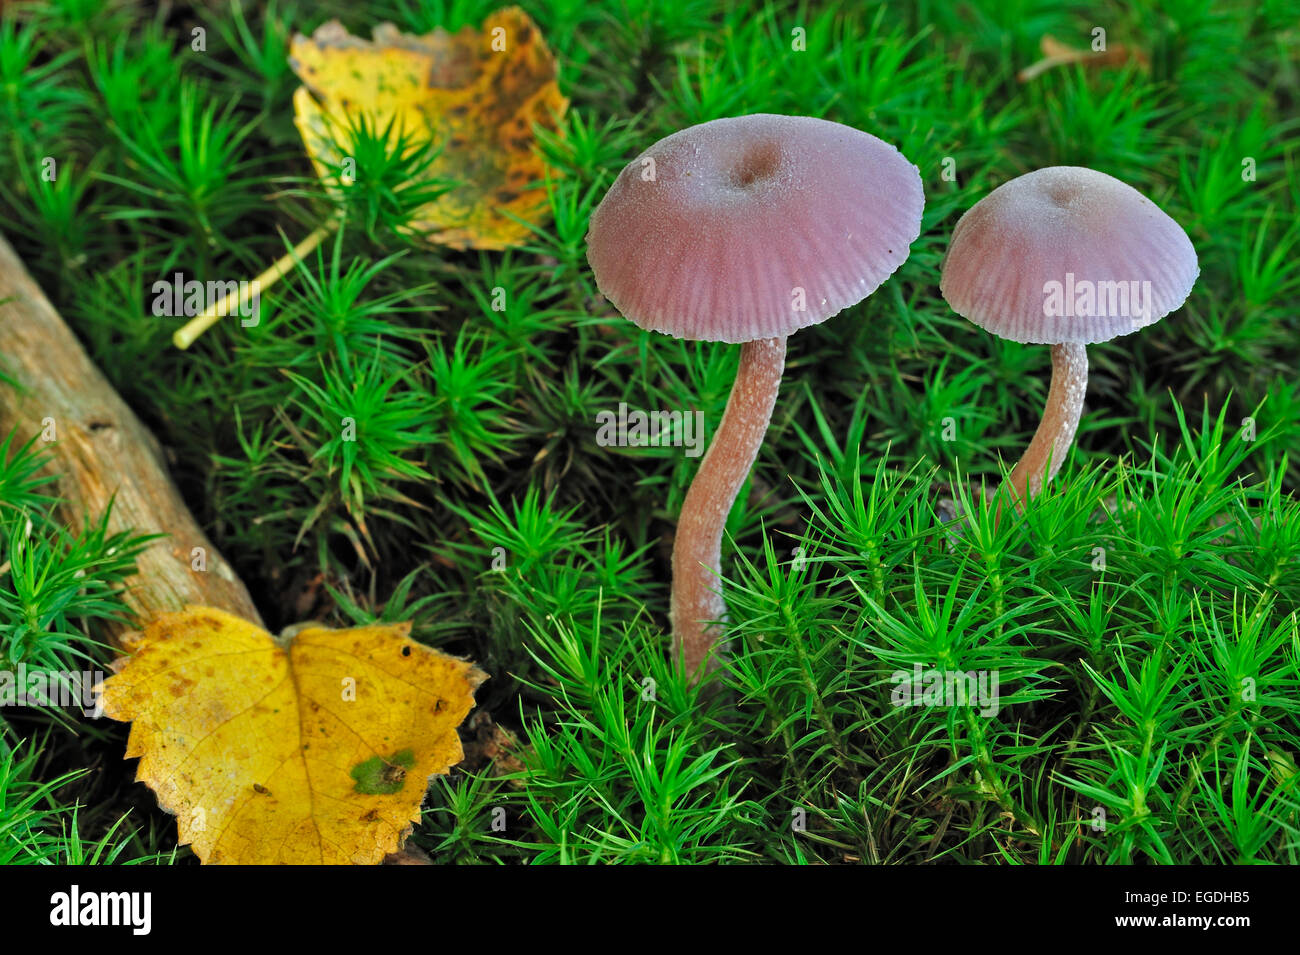 Amethyst deceiver fungi (Laccaria amethystina / Laccaria amethystea) amongst moss in autumn forest Stock Photo